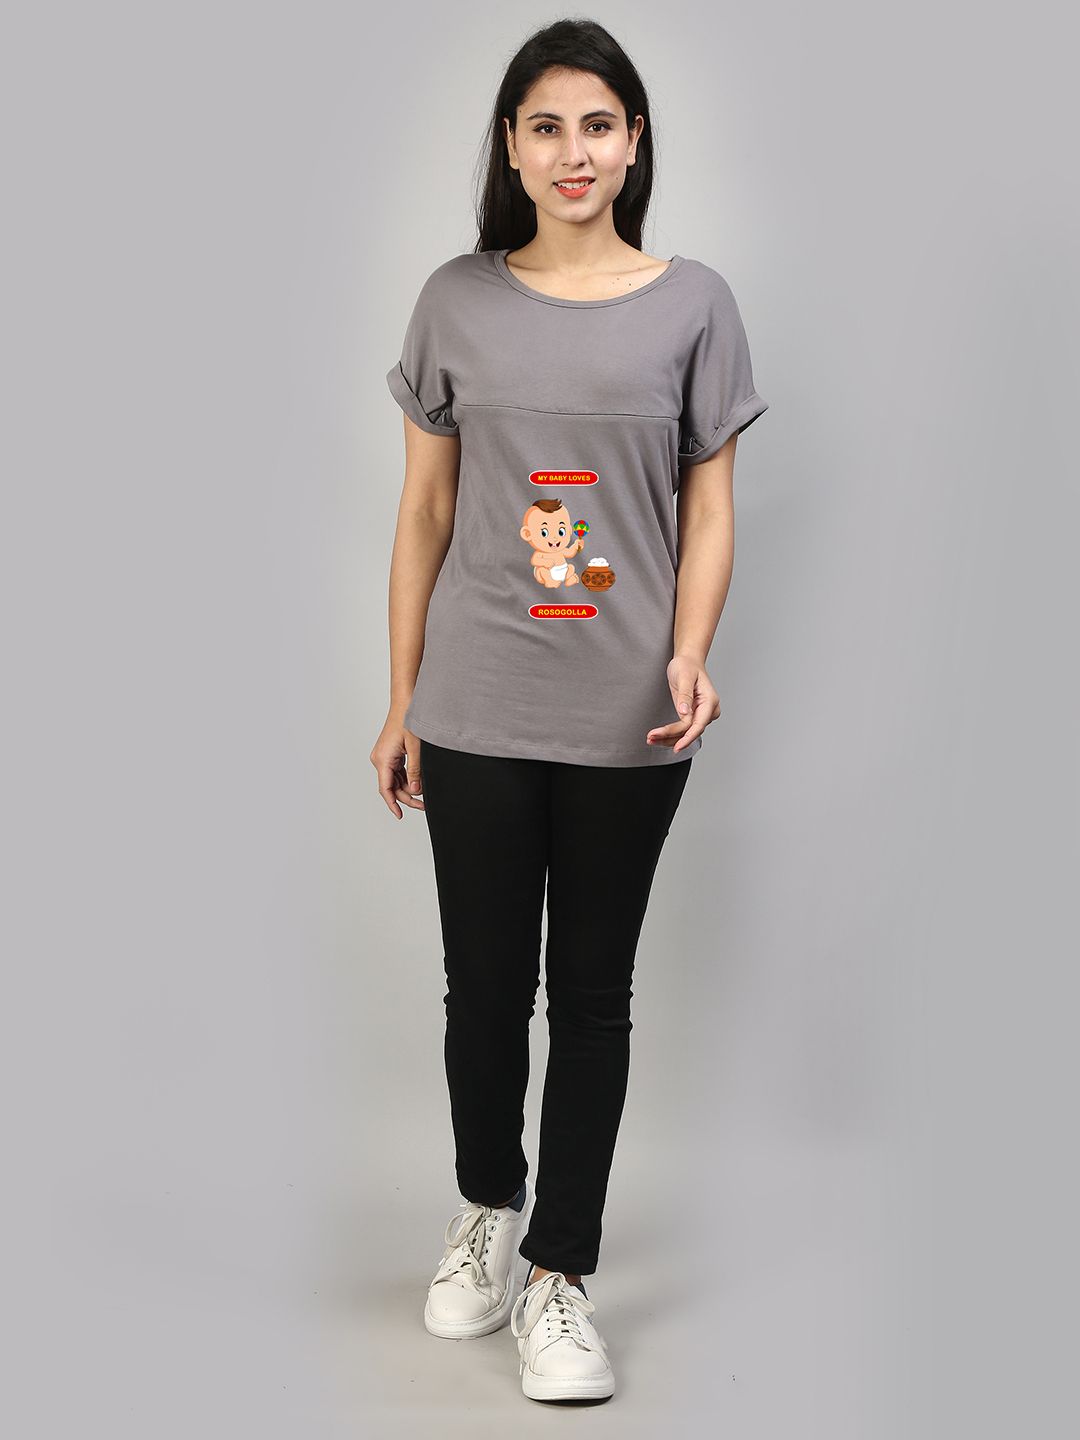 SillyBoom Women Grey Applique T-shirt Price in India